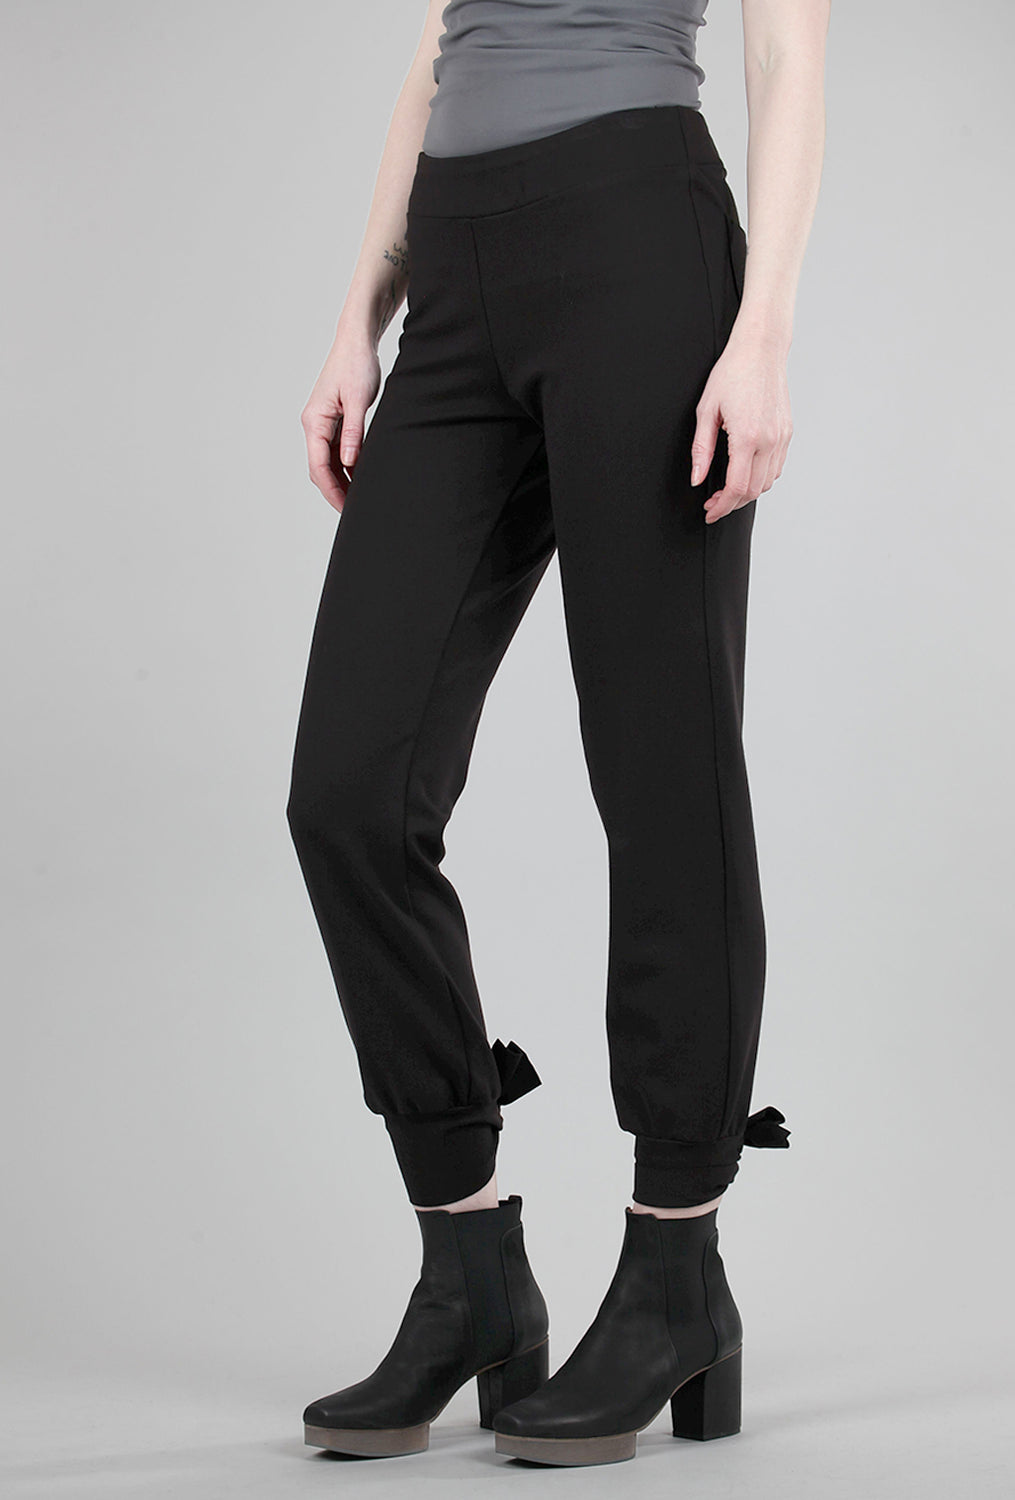 Planet Tied Up Pants, Black 